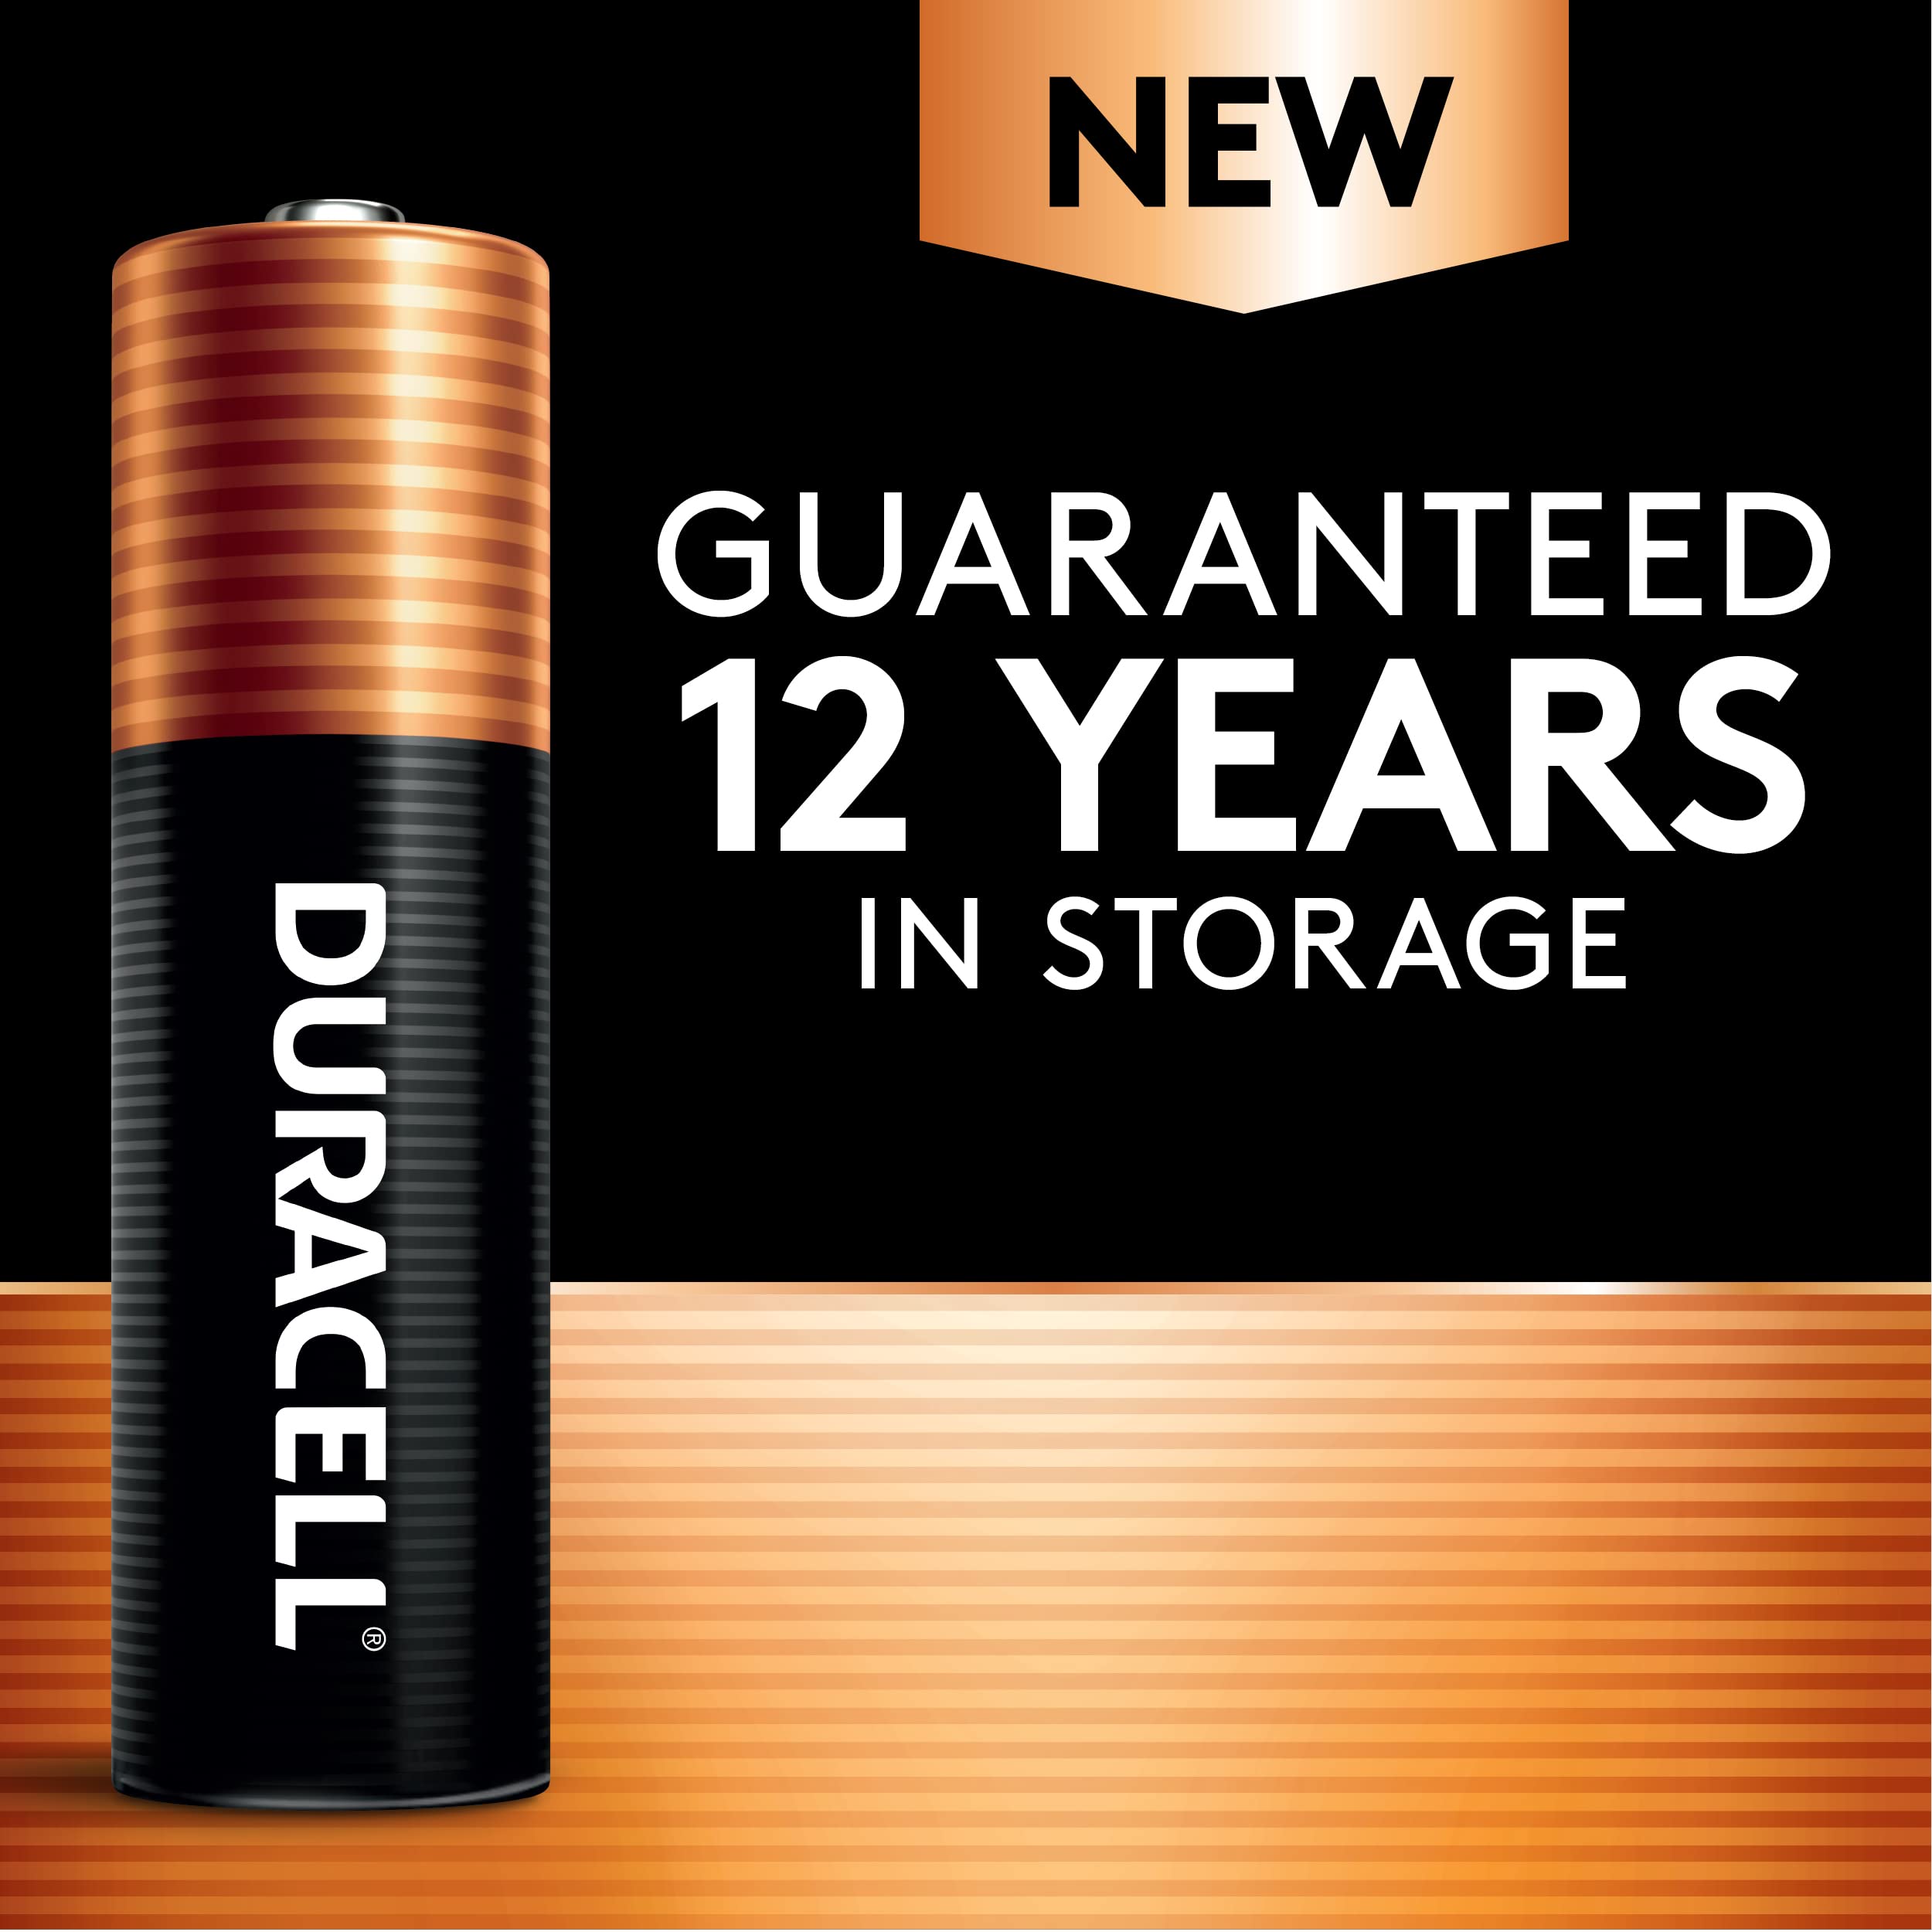 Duracell Coppertop AAA Batteries with Power Boost Ingredients, 16 Count Pack Triple A Battery with Long-lasting Power, Alkaline AAA Battery for Household and Office Devices